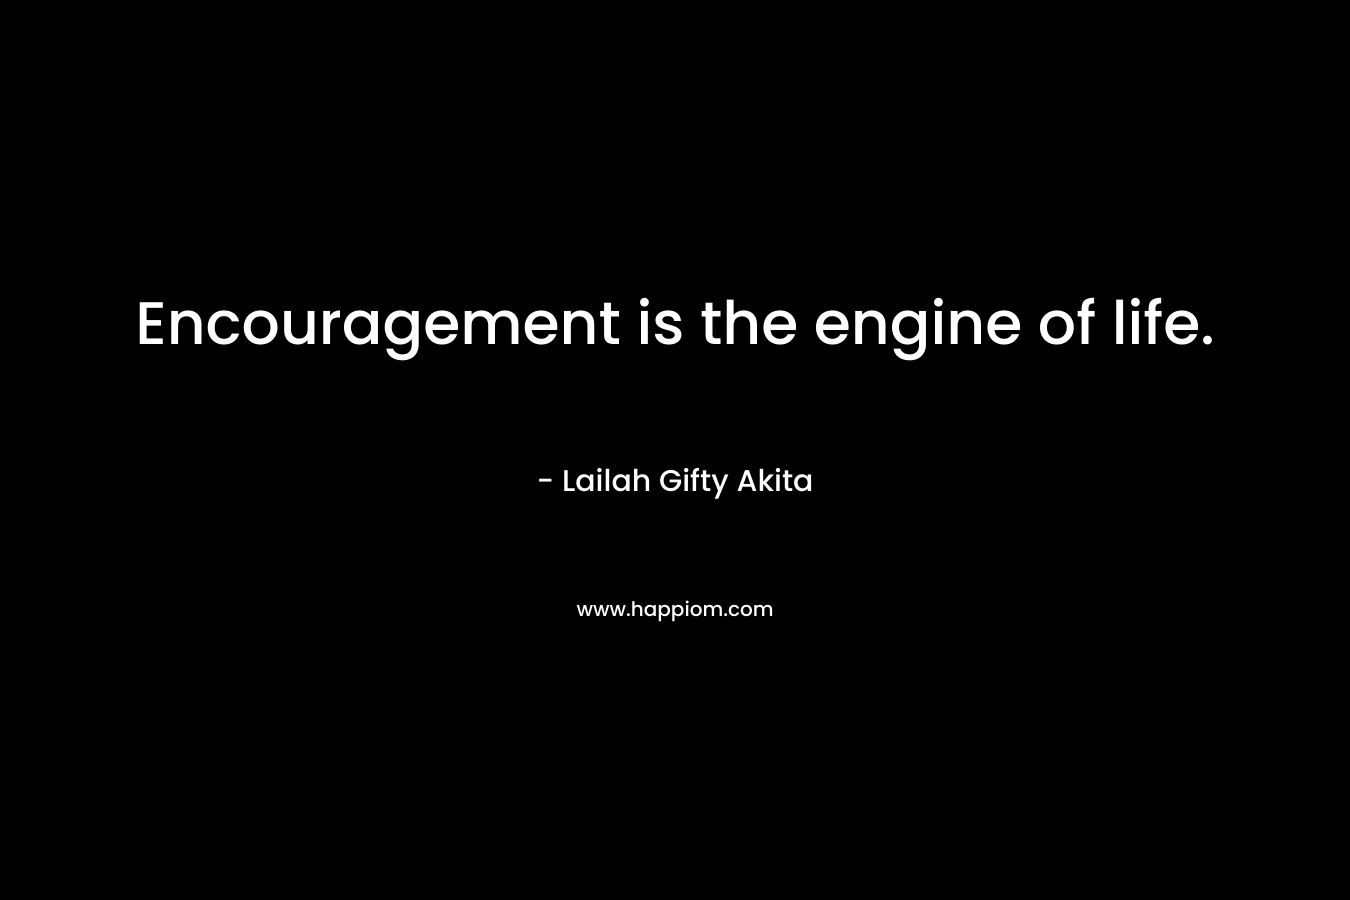 Encouragement is the engine of life.